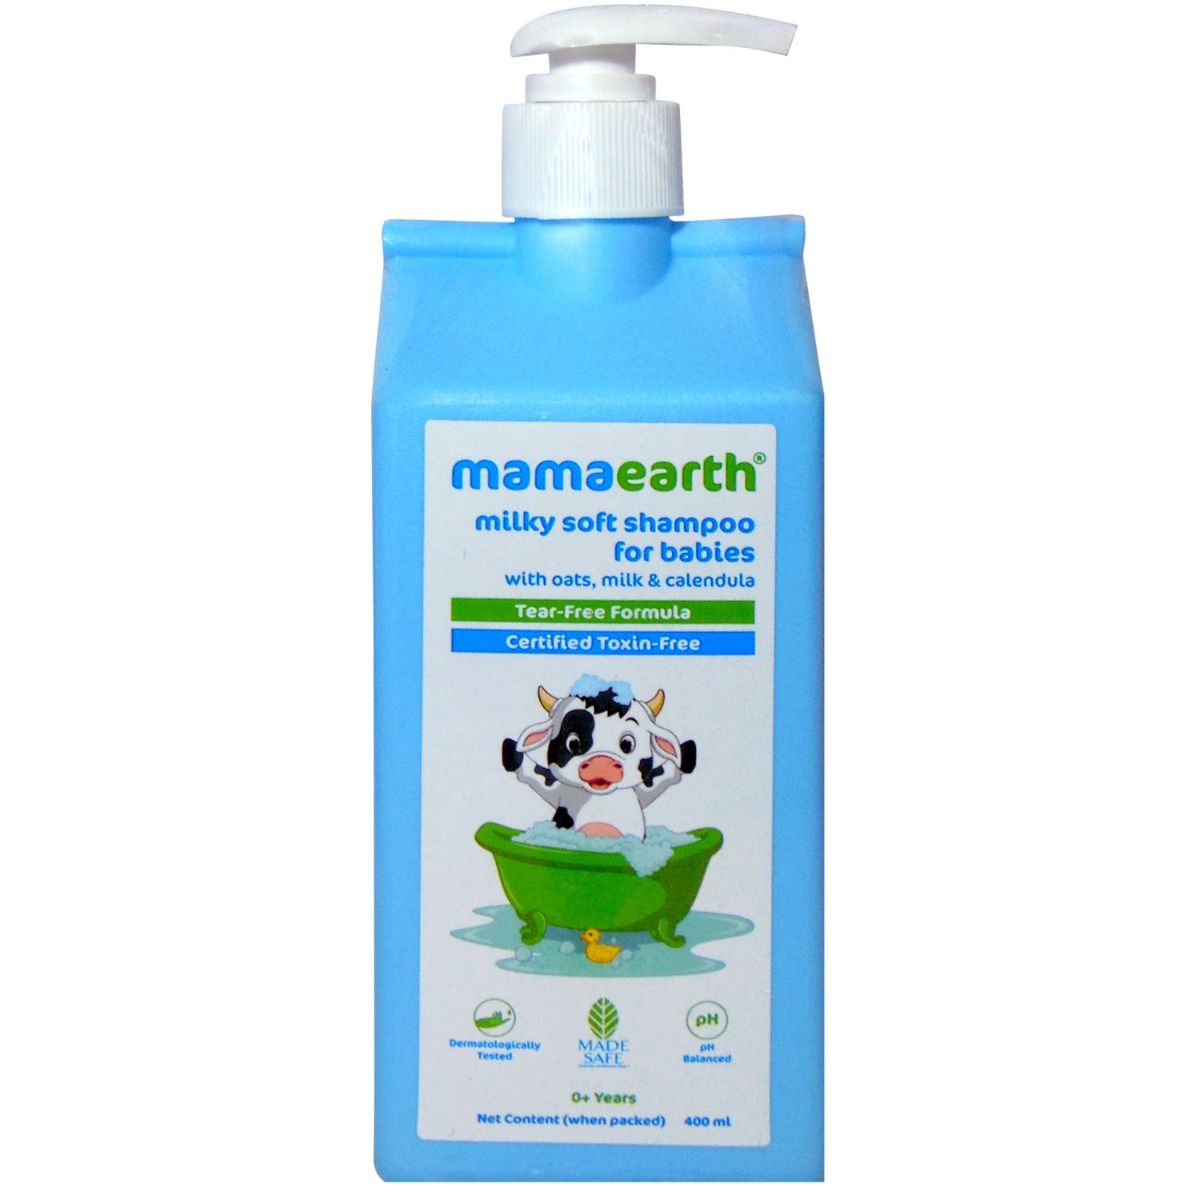 Mamaearth Milky Soft Shampoo For Babies, 0-5Yrs, 400 ml, Pack of 1 